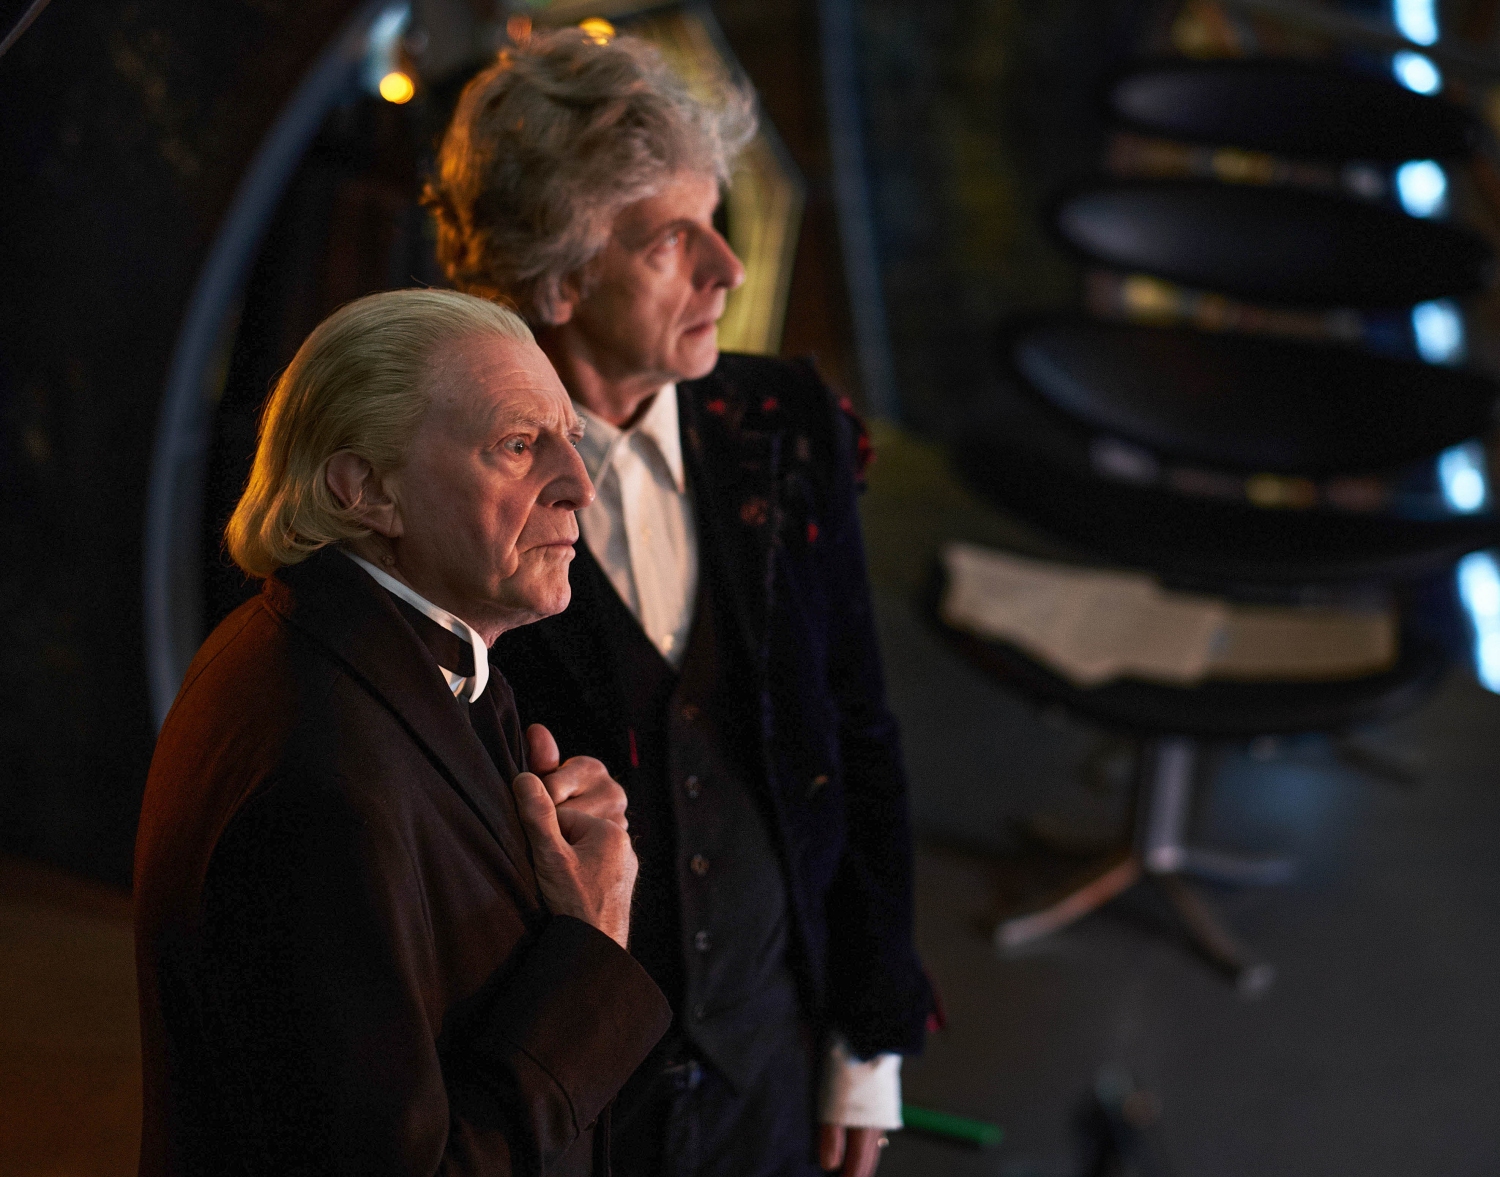 watch twice upon a time doctor who